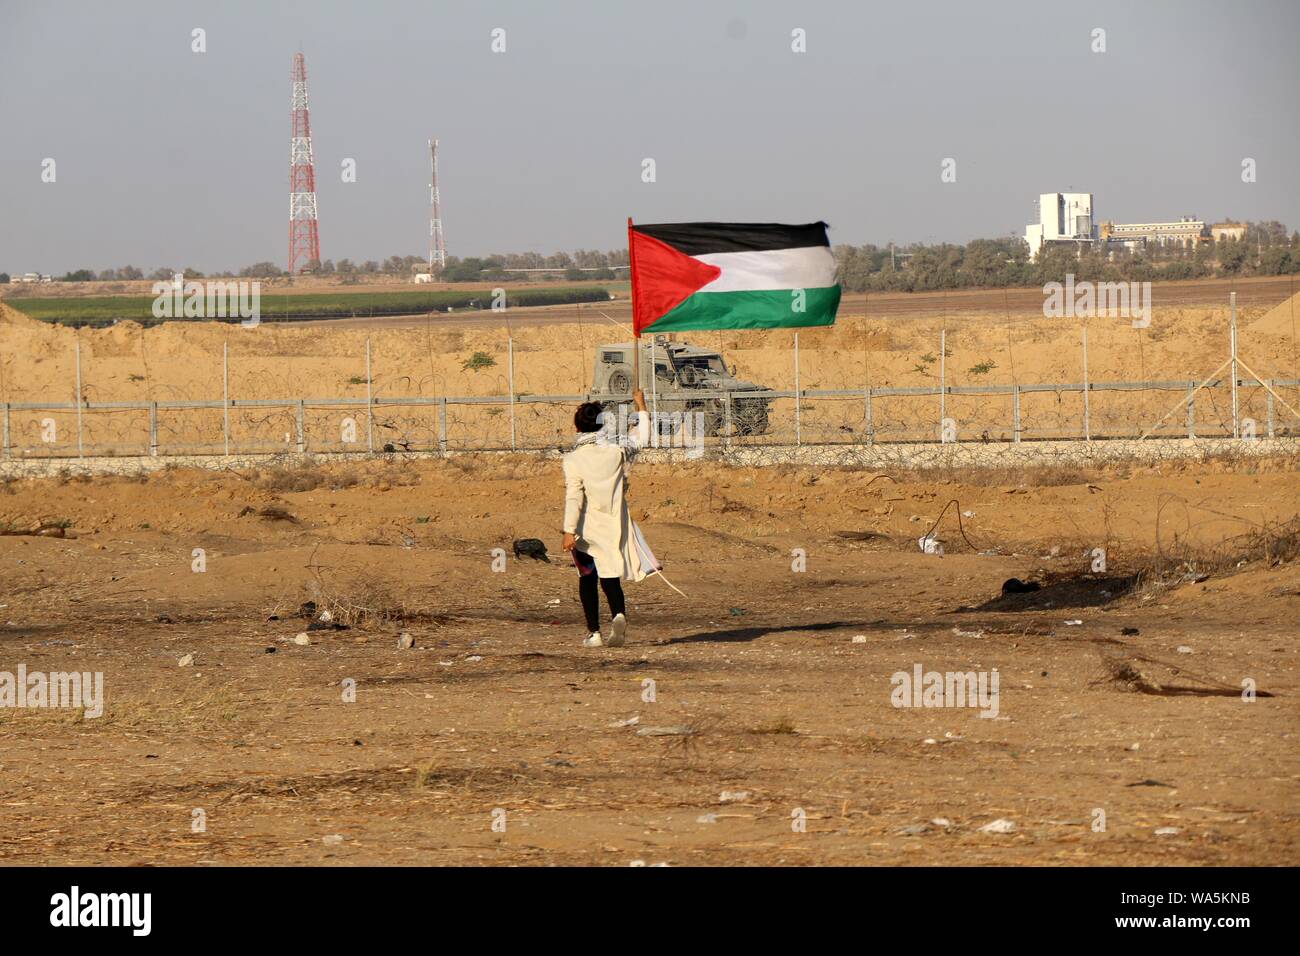 Khan Younis, Gaza Strip, Palestinian Territory. 16th Aug, 2019. Palestinian protesters clash with Israeli troops following the tents protest where Palestinians demand the right to return to their homeland at the Israel-Gaza border. Credit: Mariam Dagga/APA Images/ZUMA Wire/Alamy Live News Stock Photo